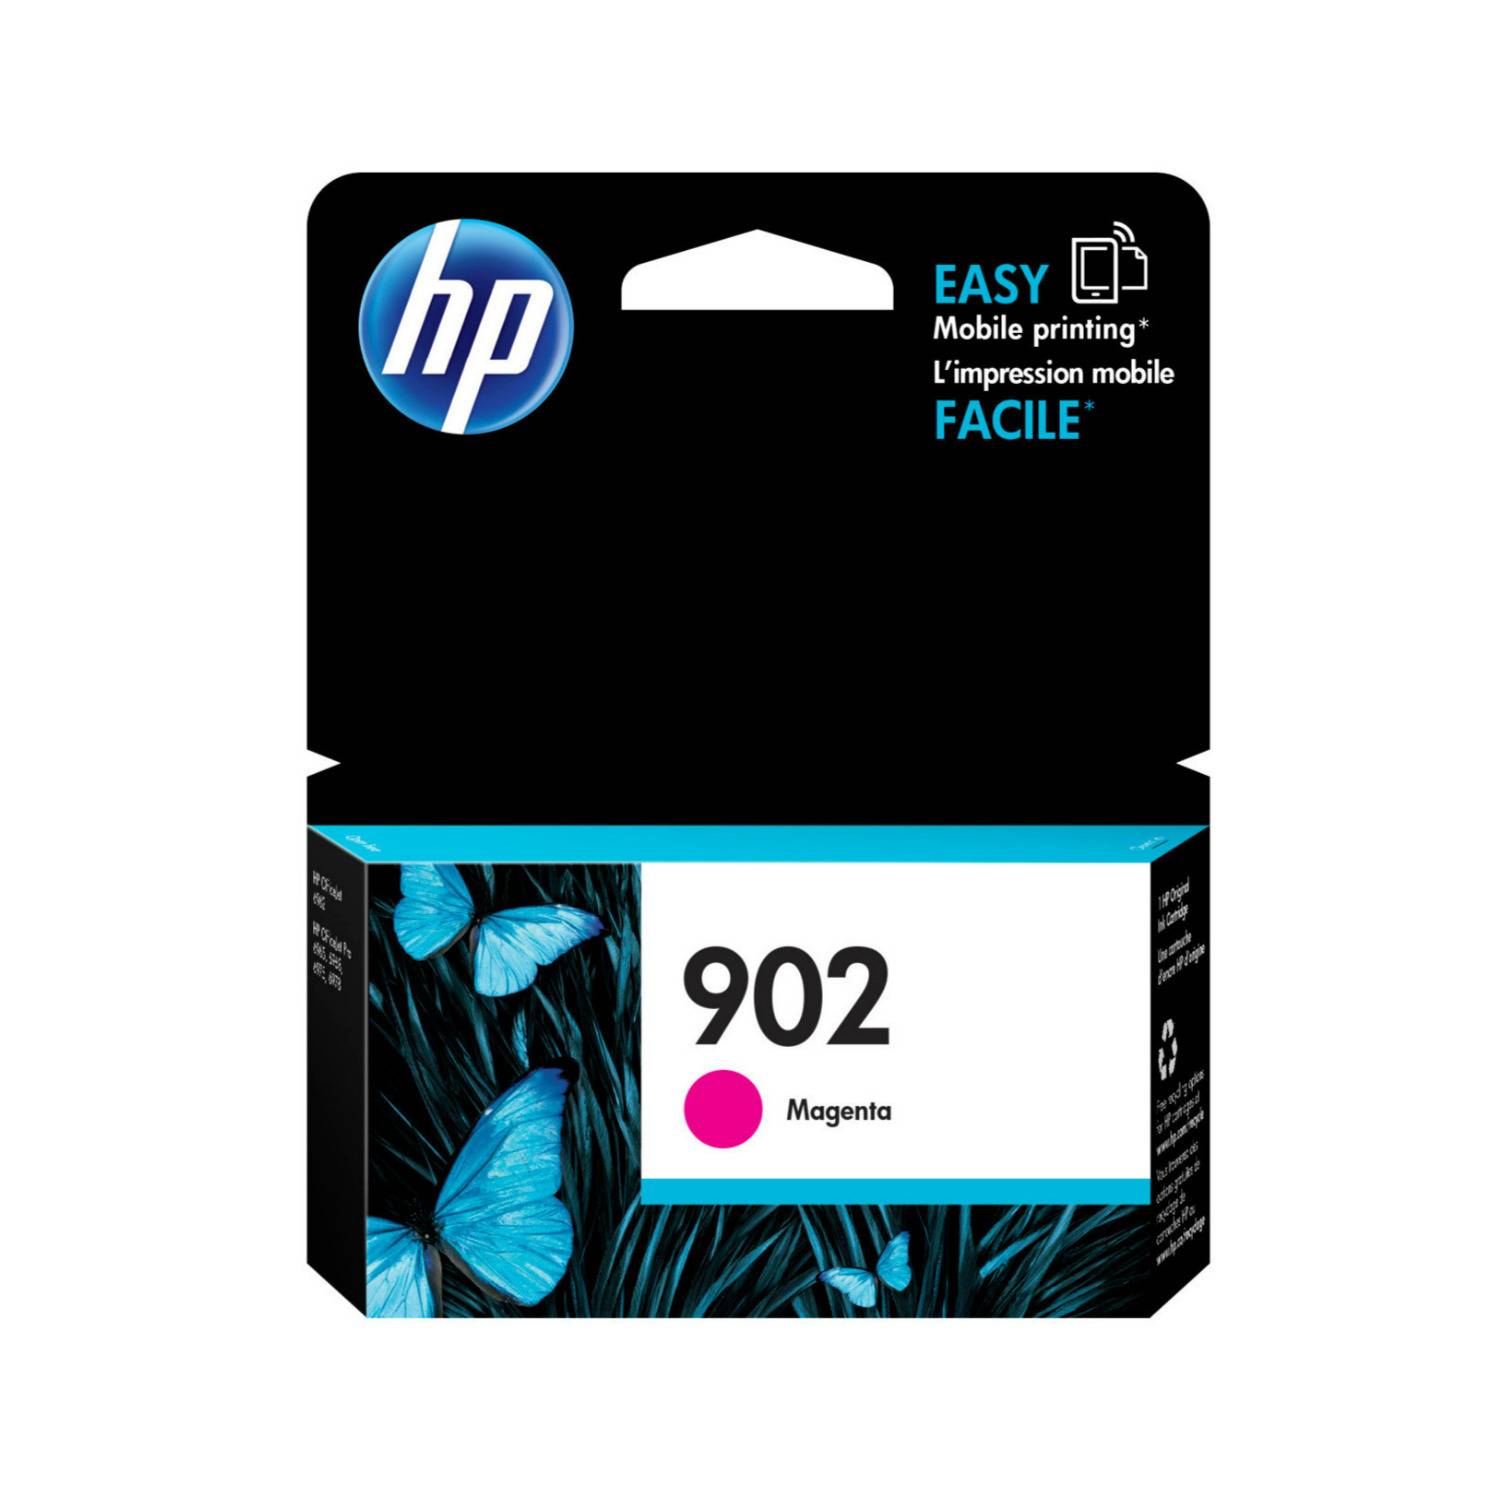 HP Highly Productive, Convenient, and Recyclable 902 Magenta Original Ink Cartridge (315 Pages)